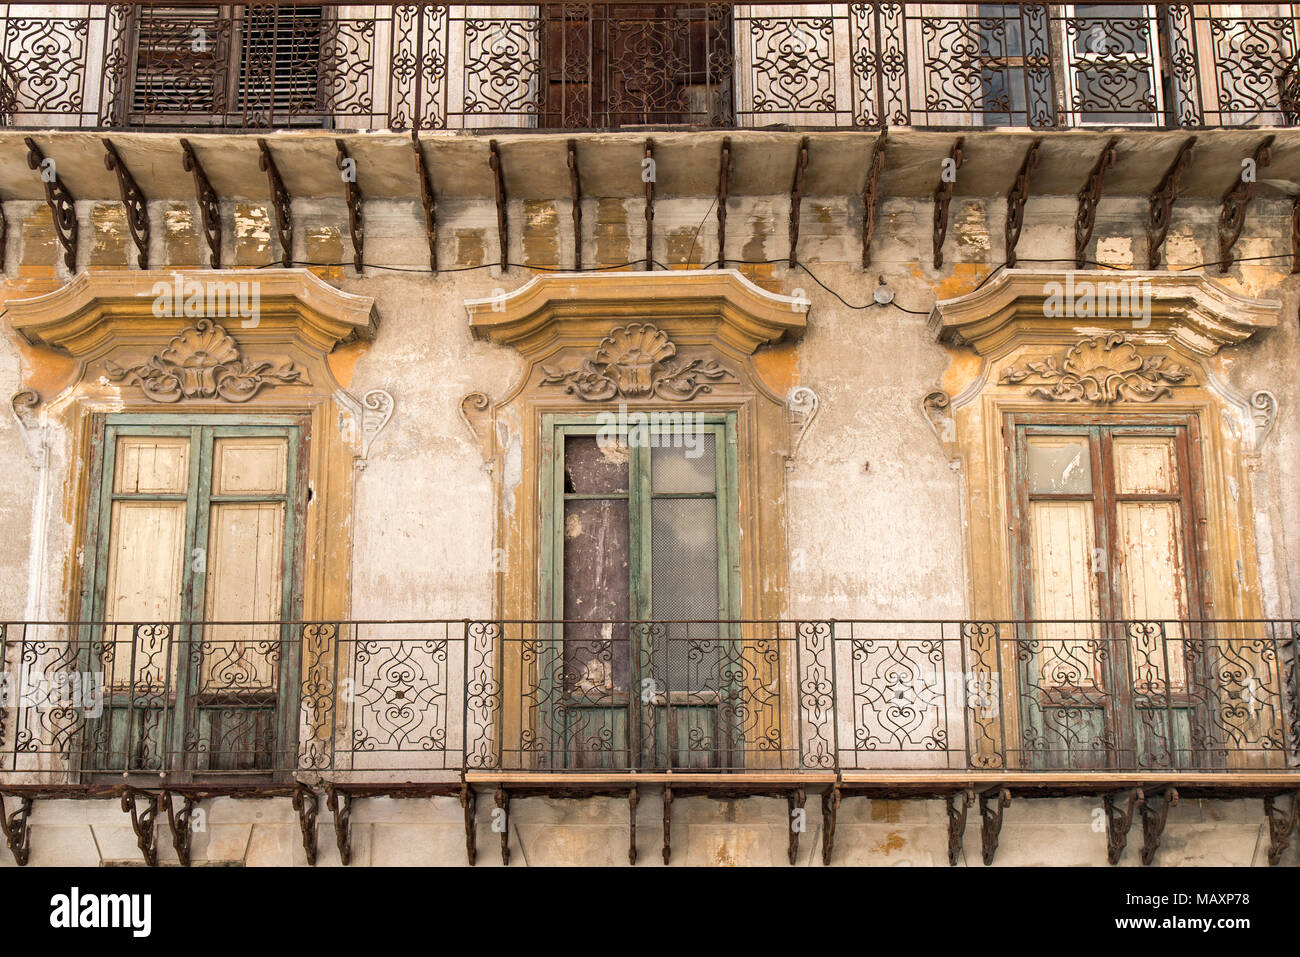 Balcony on a building overlooking the fountain at Piazza Pretoria in palermo, Sicily, Italy. Stock Photo